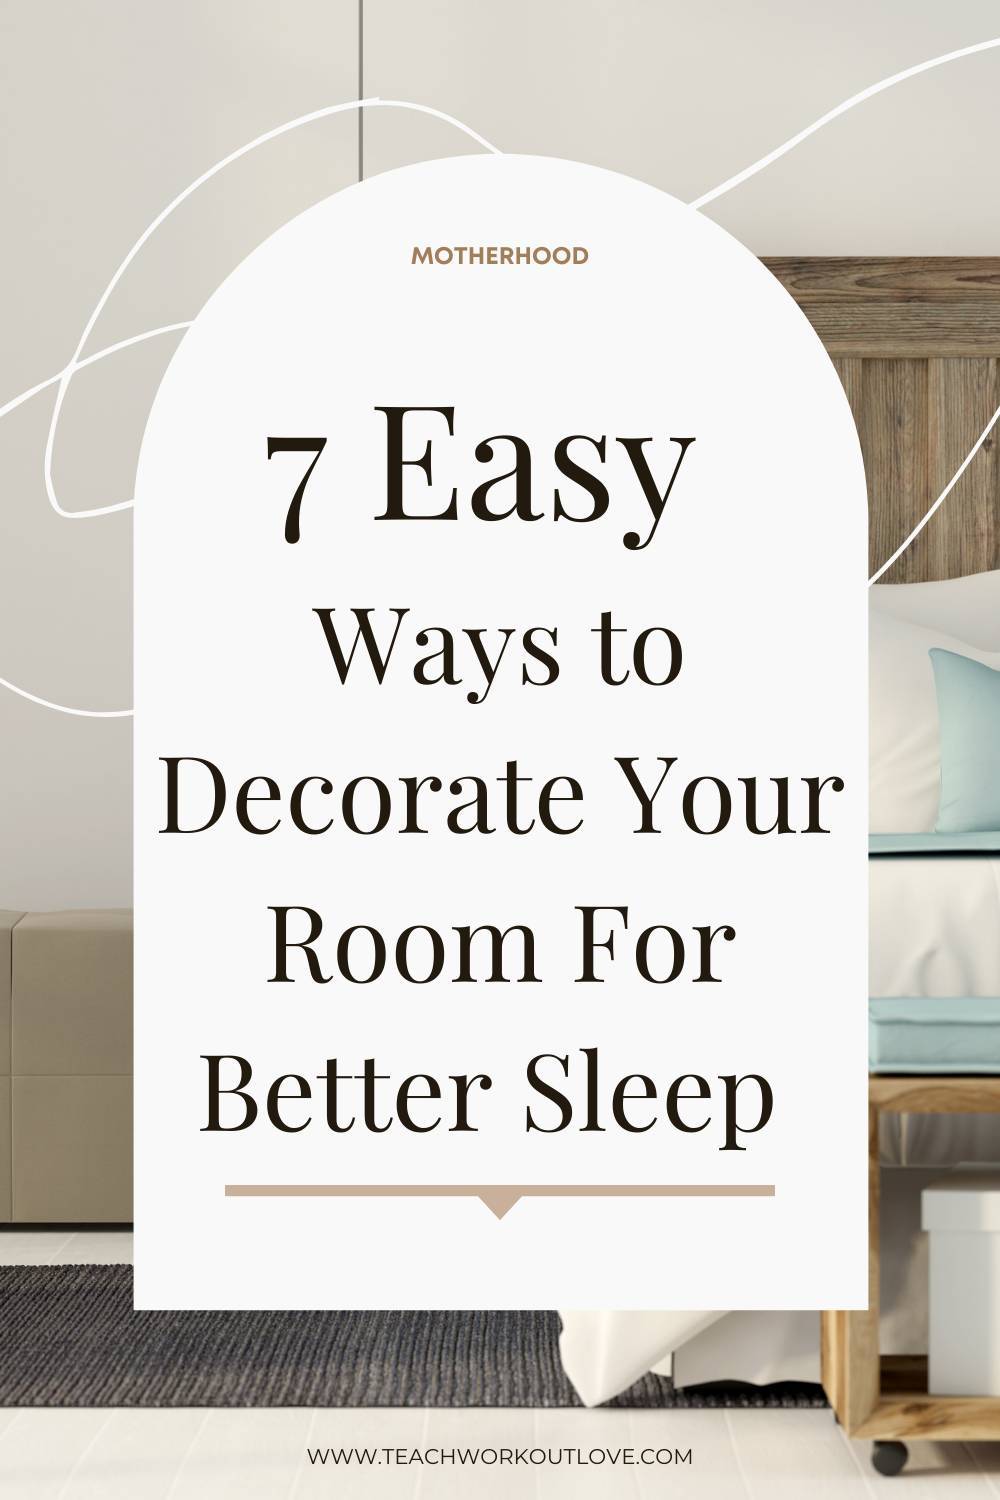 Looking for new ways to decorate your bedroom so you can sleep better? We have an awesome list that you can buy right on Amazon!